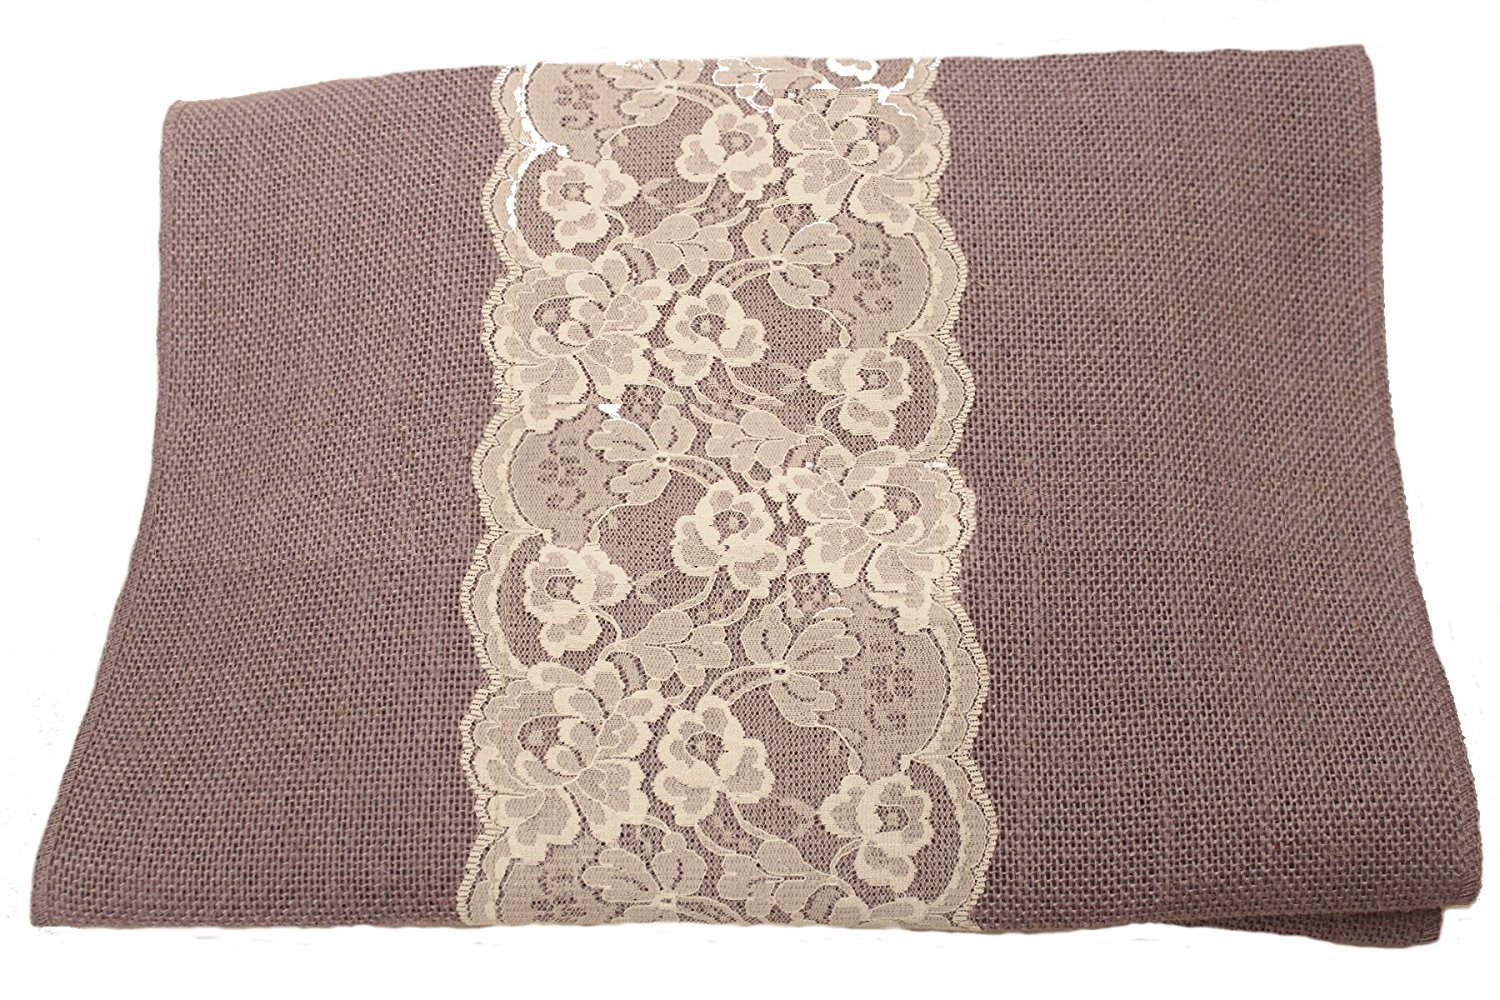 14" Violet Burlap Runner with 6" White Lace